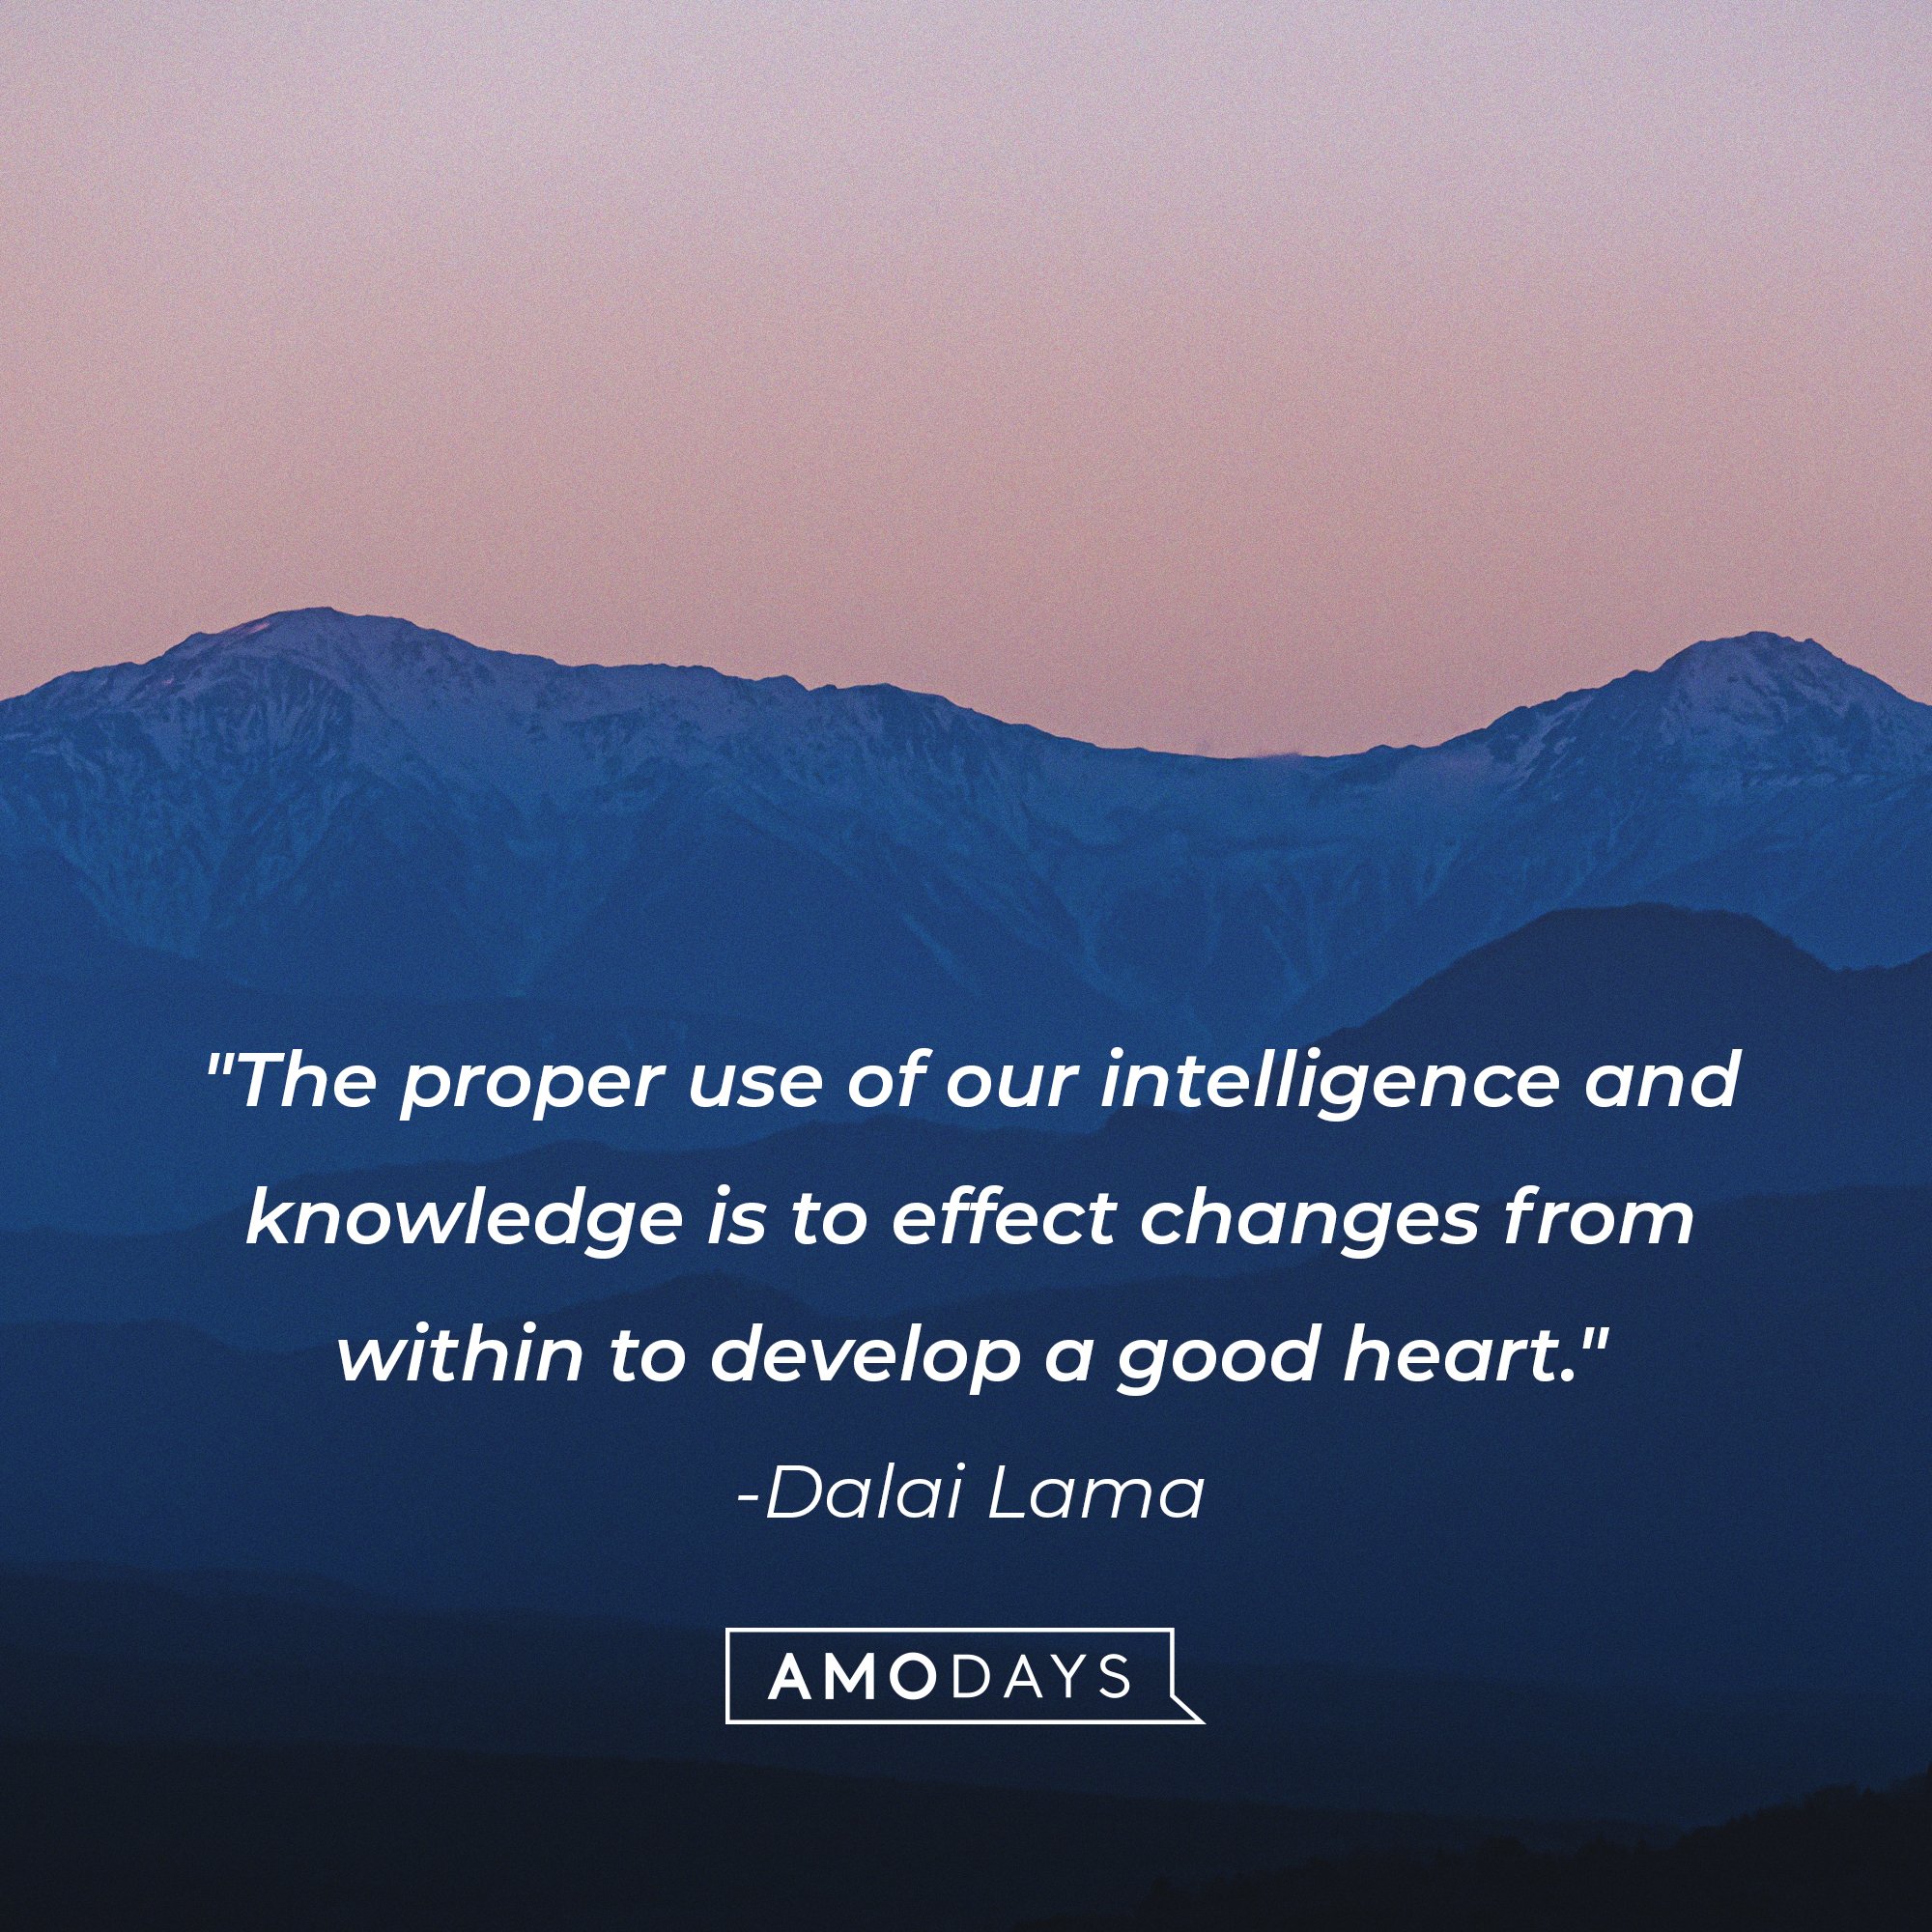 The Dalai Lama’s quote: "The proper use of our intelligence and knowledge is to effect changes from within to develop a good heart." | Image: AmoDays 